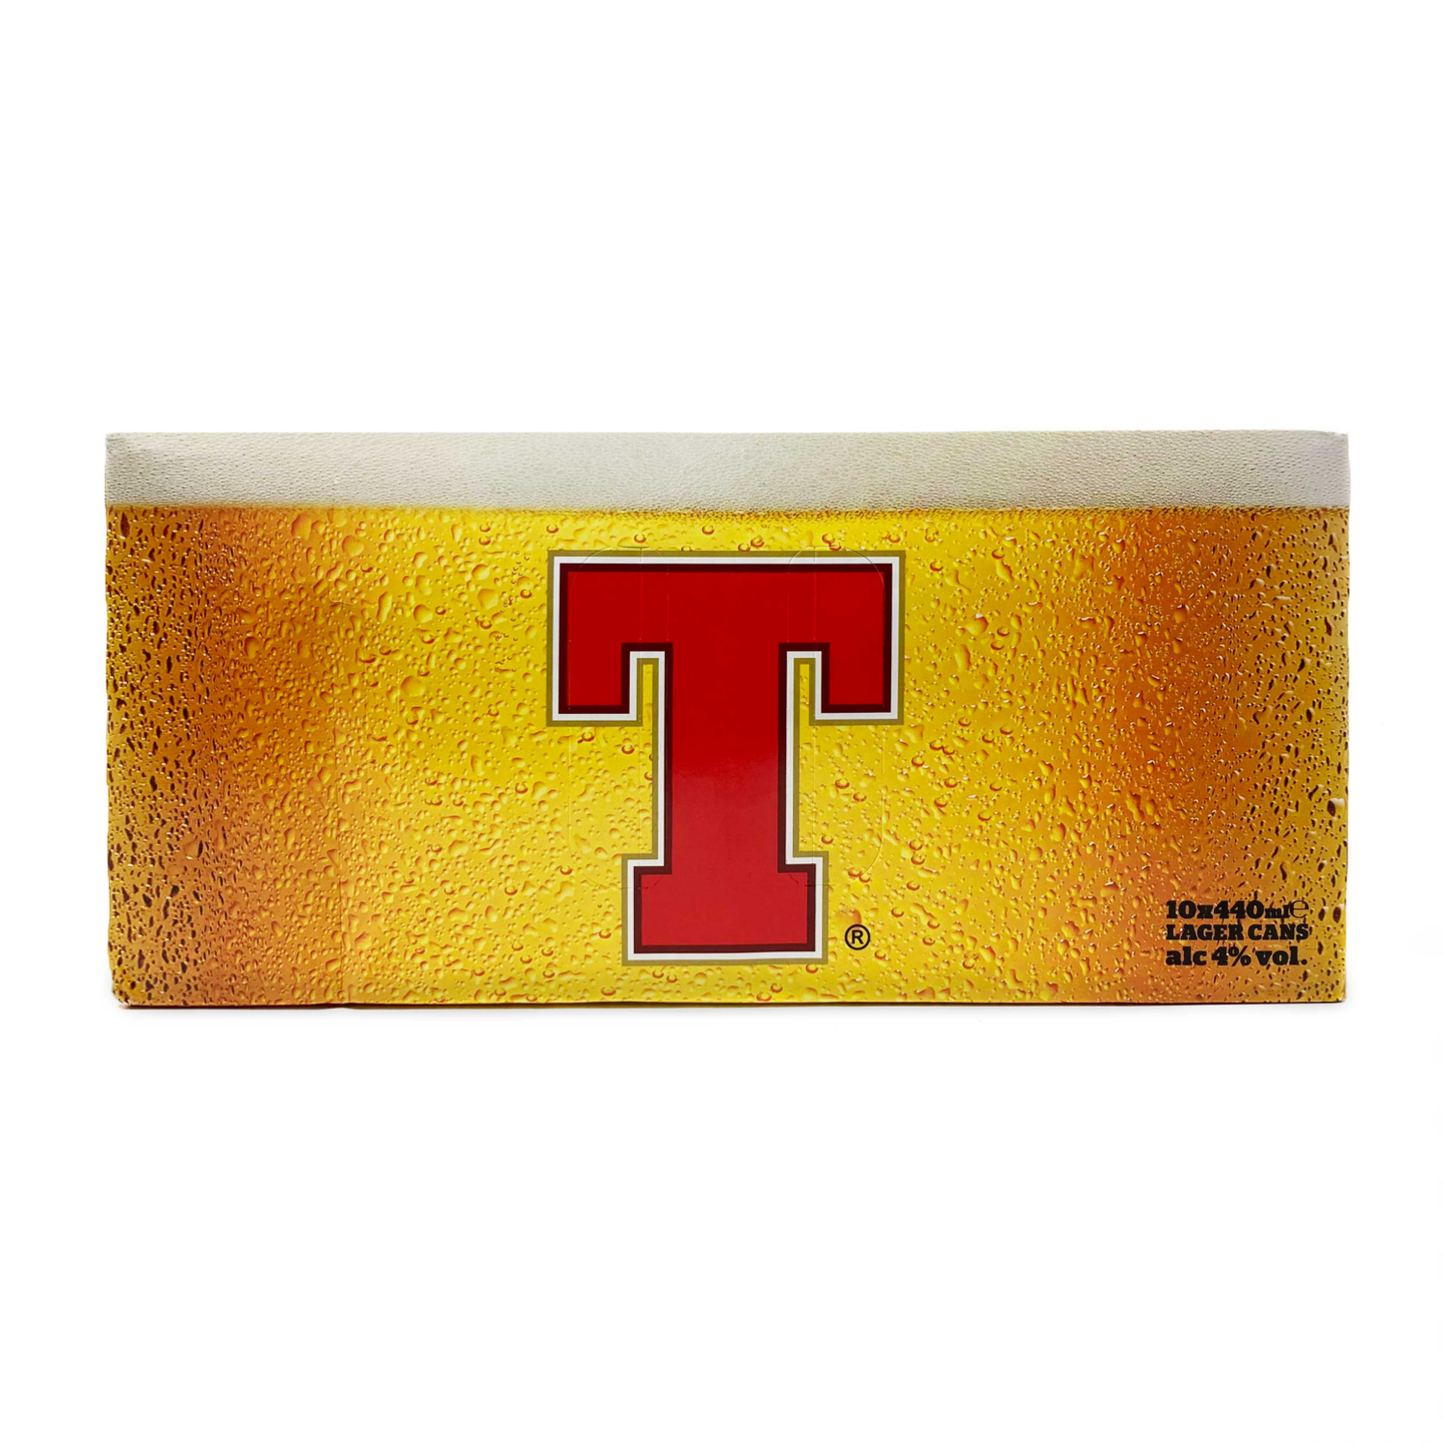 Tennent's Lager 10x440ml